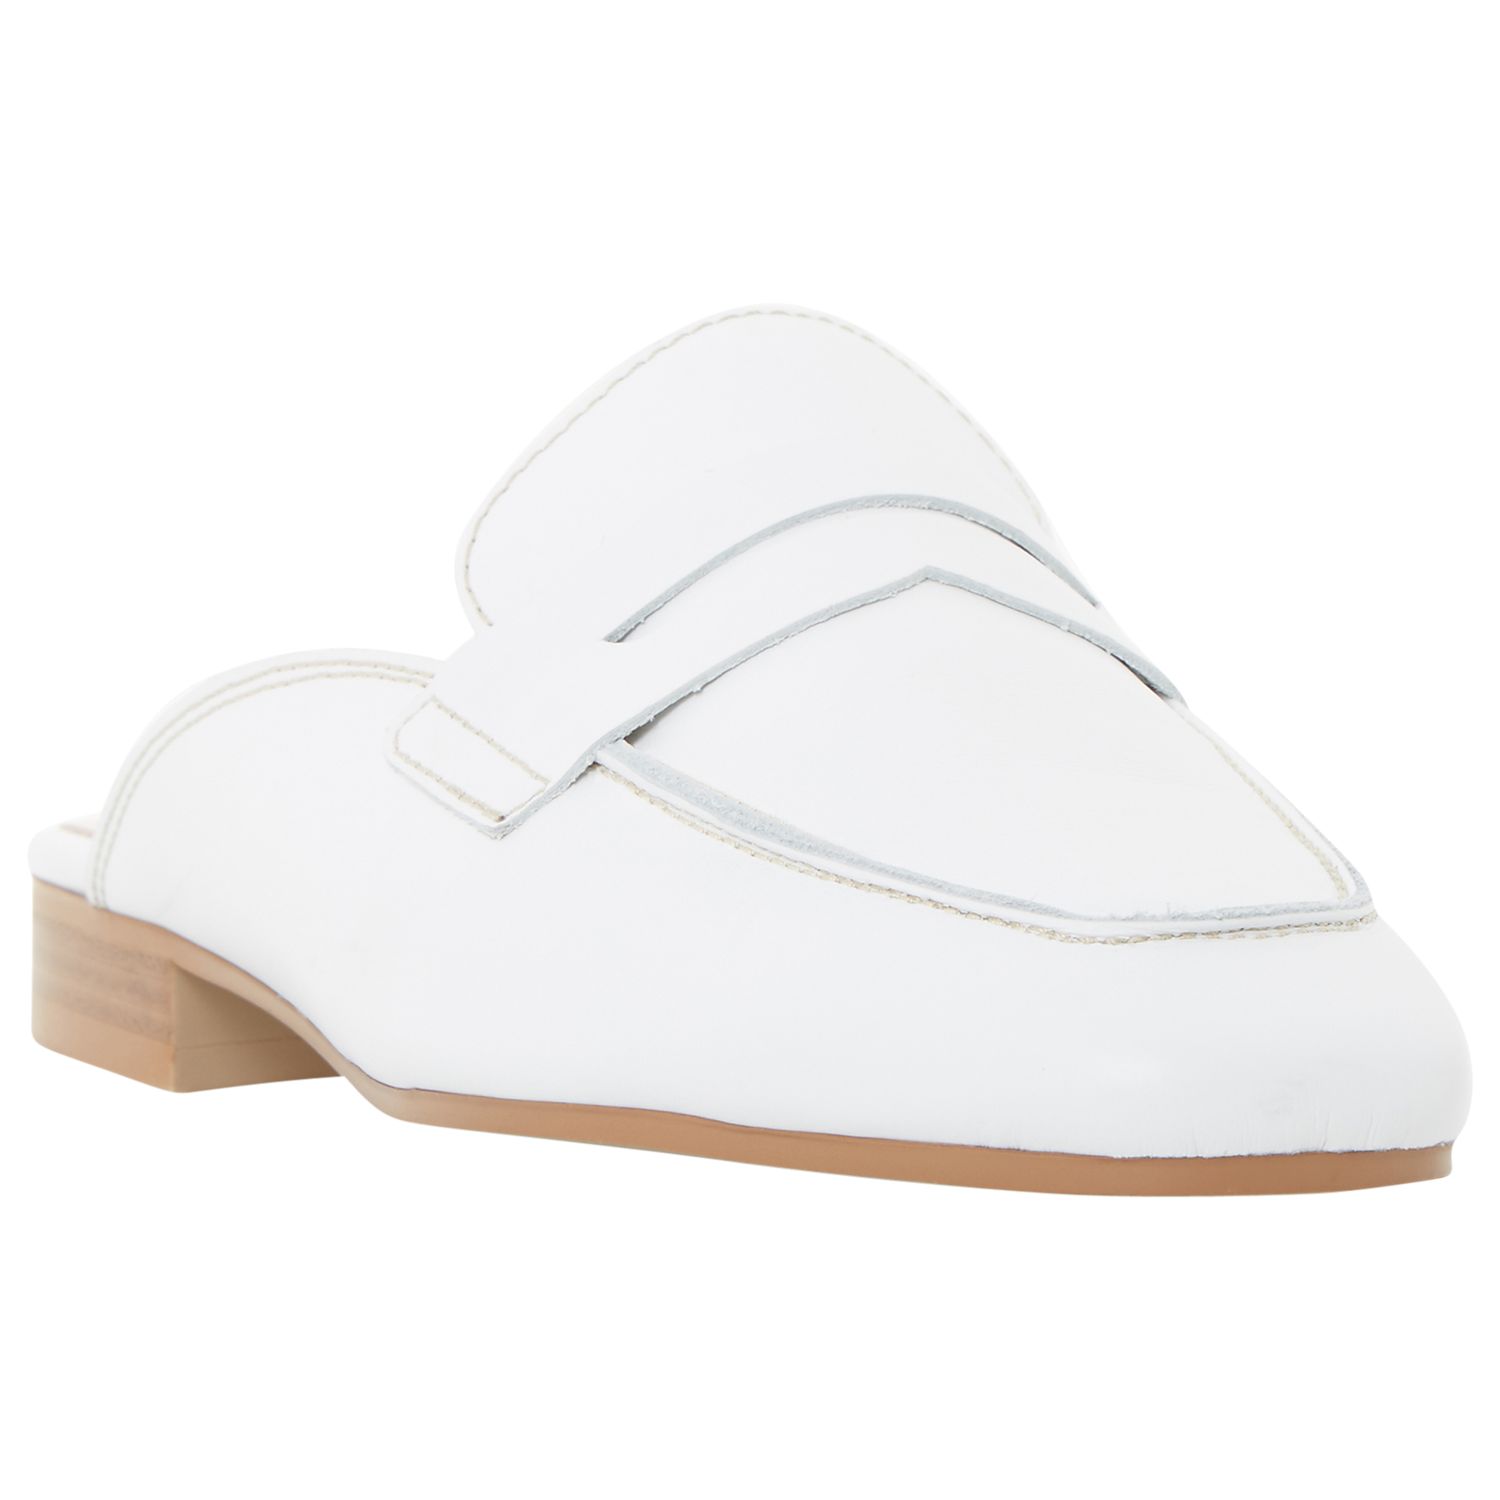 Dune Gaze Backless Loafers, White, 5